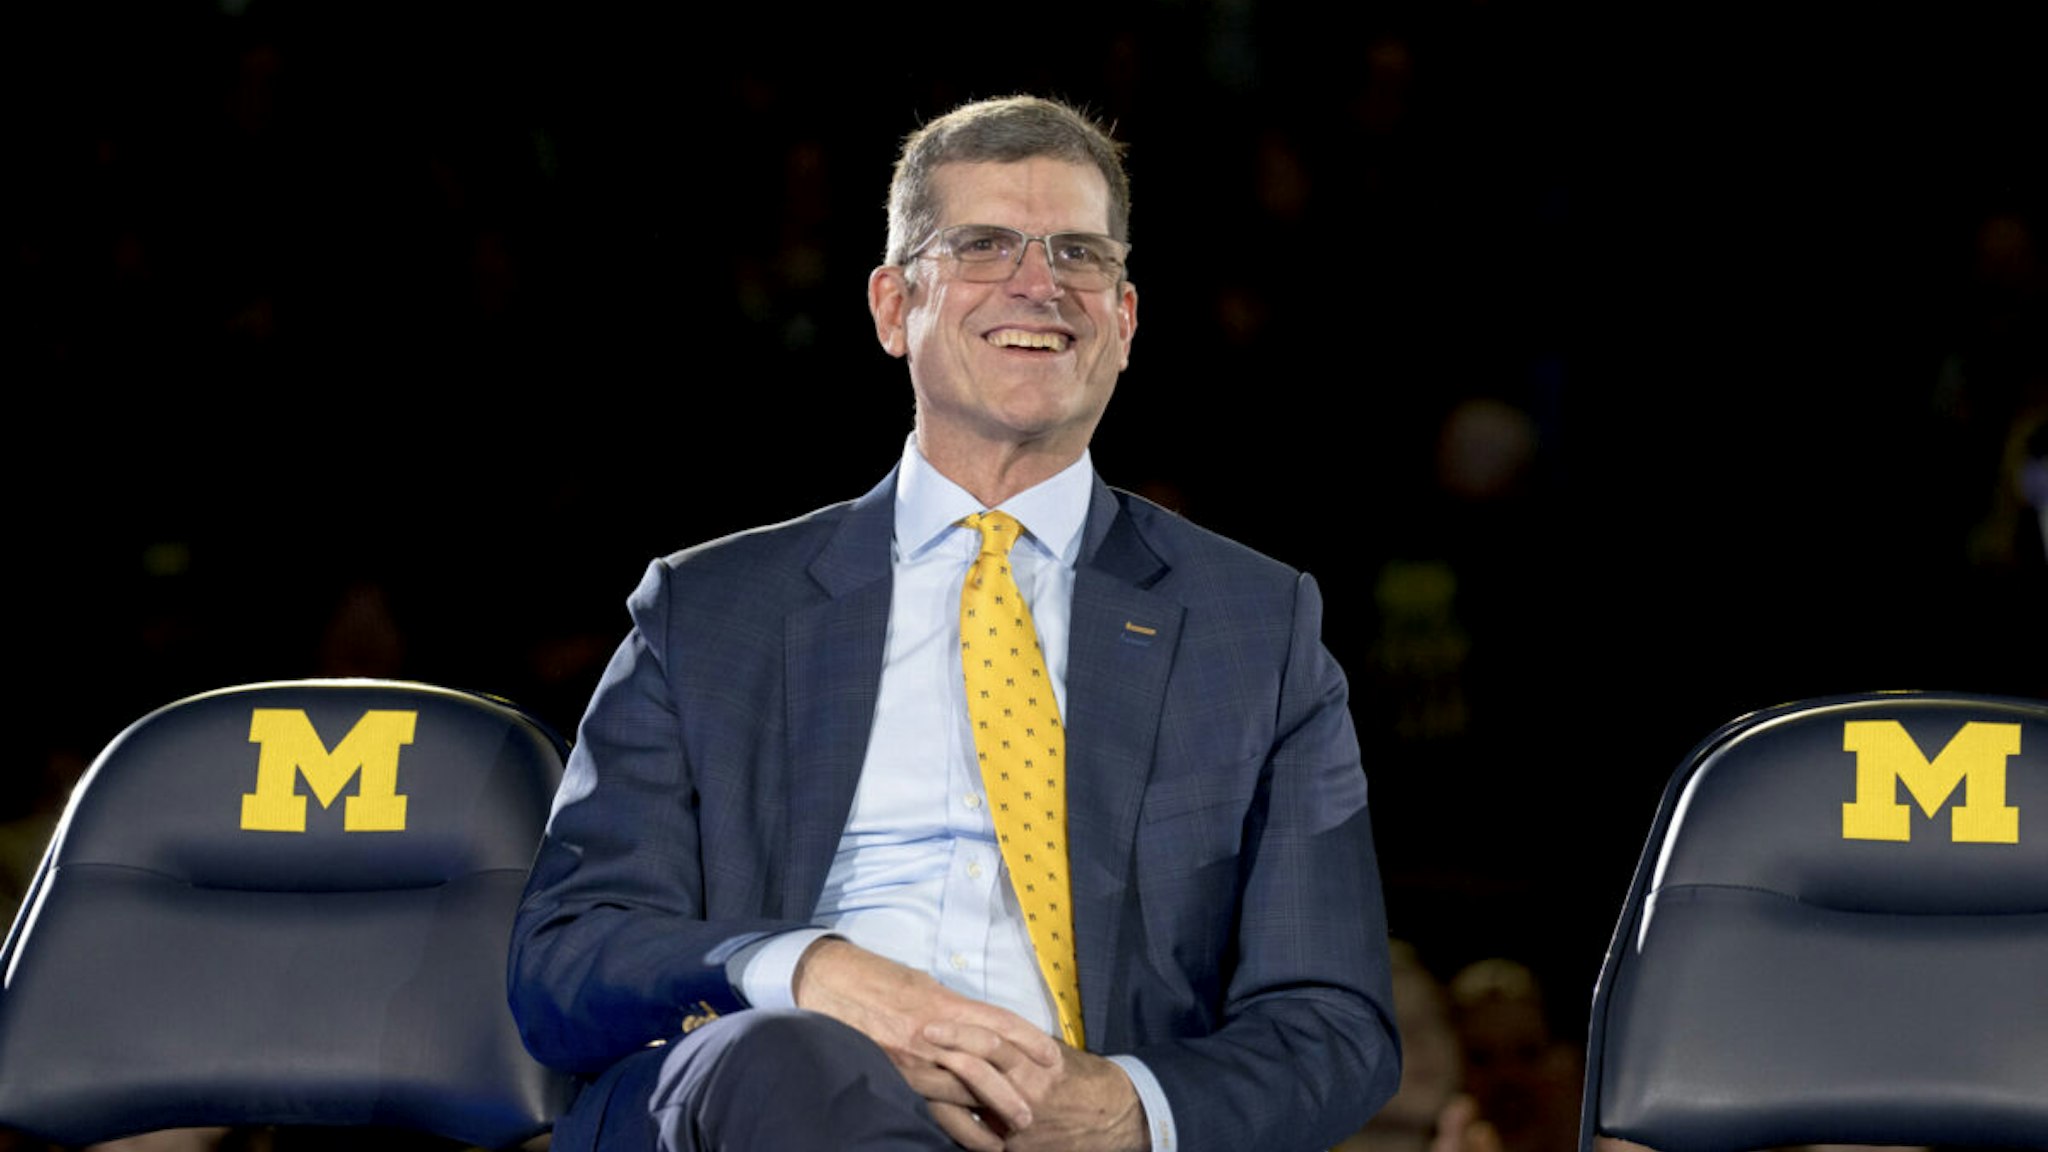 ANN ARBOR, MICHIGAN - JANUARY 13: Head coach Jim Harbaugh of the Michigan Wolverines smiles during the Michigan Wolverines football National Championship celebration on January 13, 2024 at Crisler Center in Ann Arbor, Michigan.